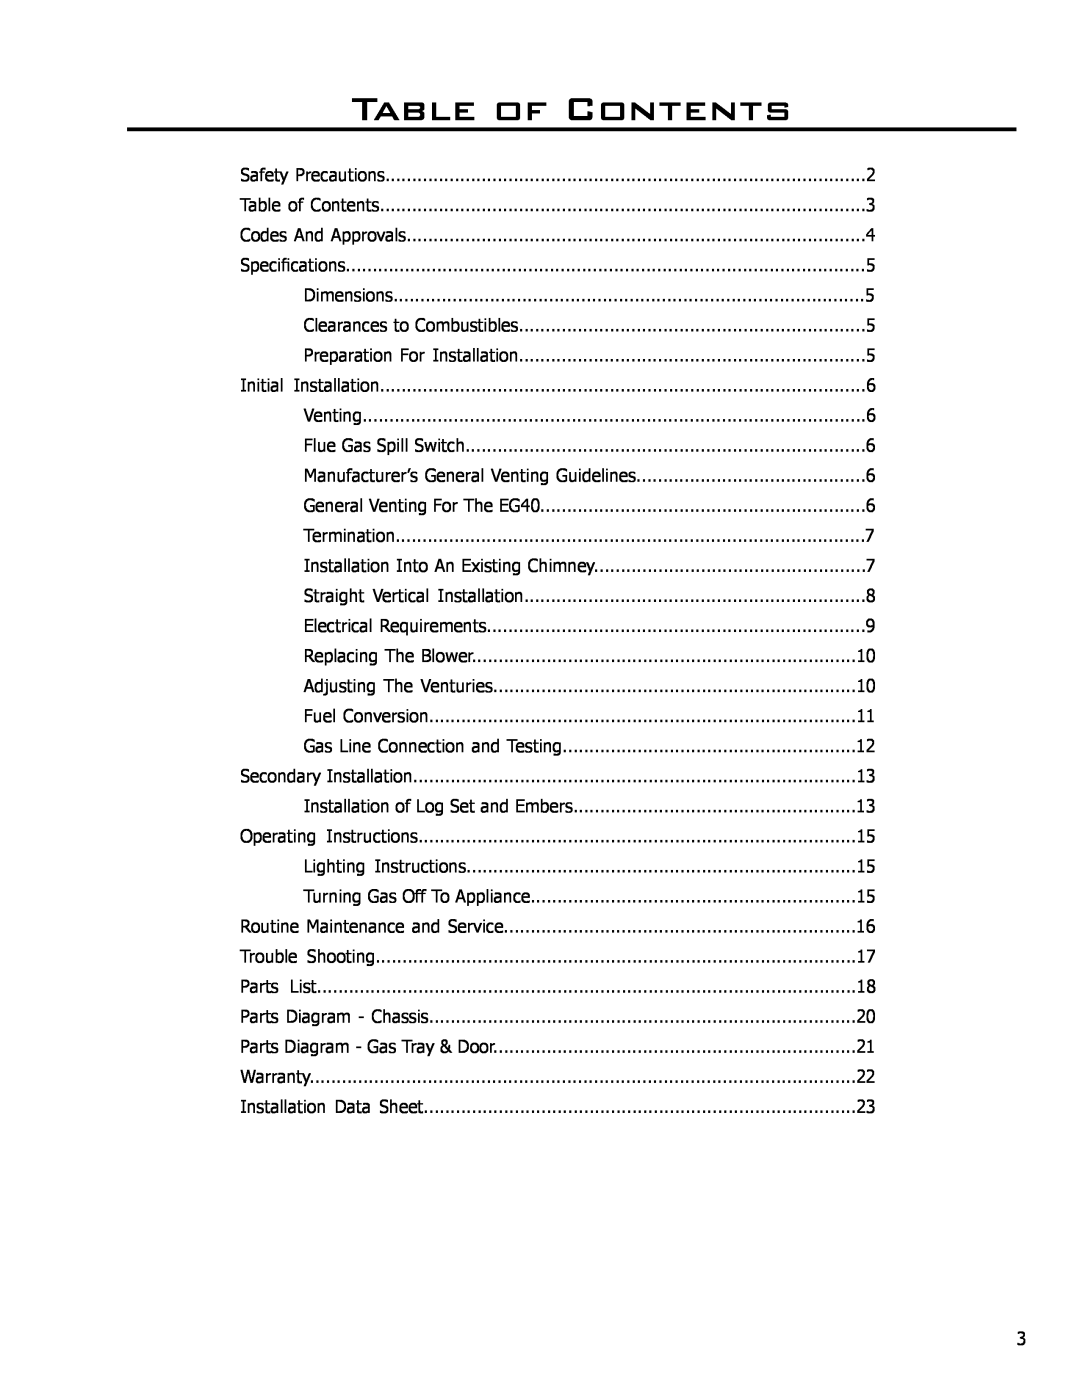 Enviro EG40 BV owner manual Table of Contents 